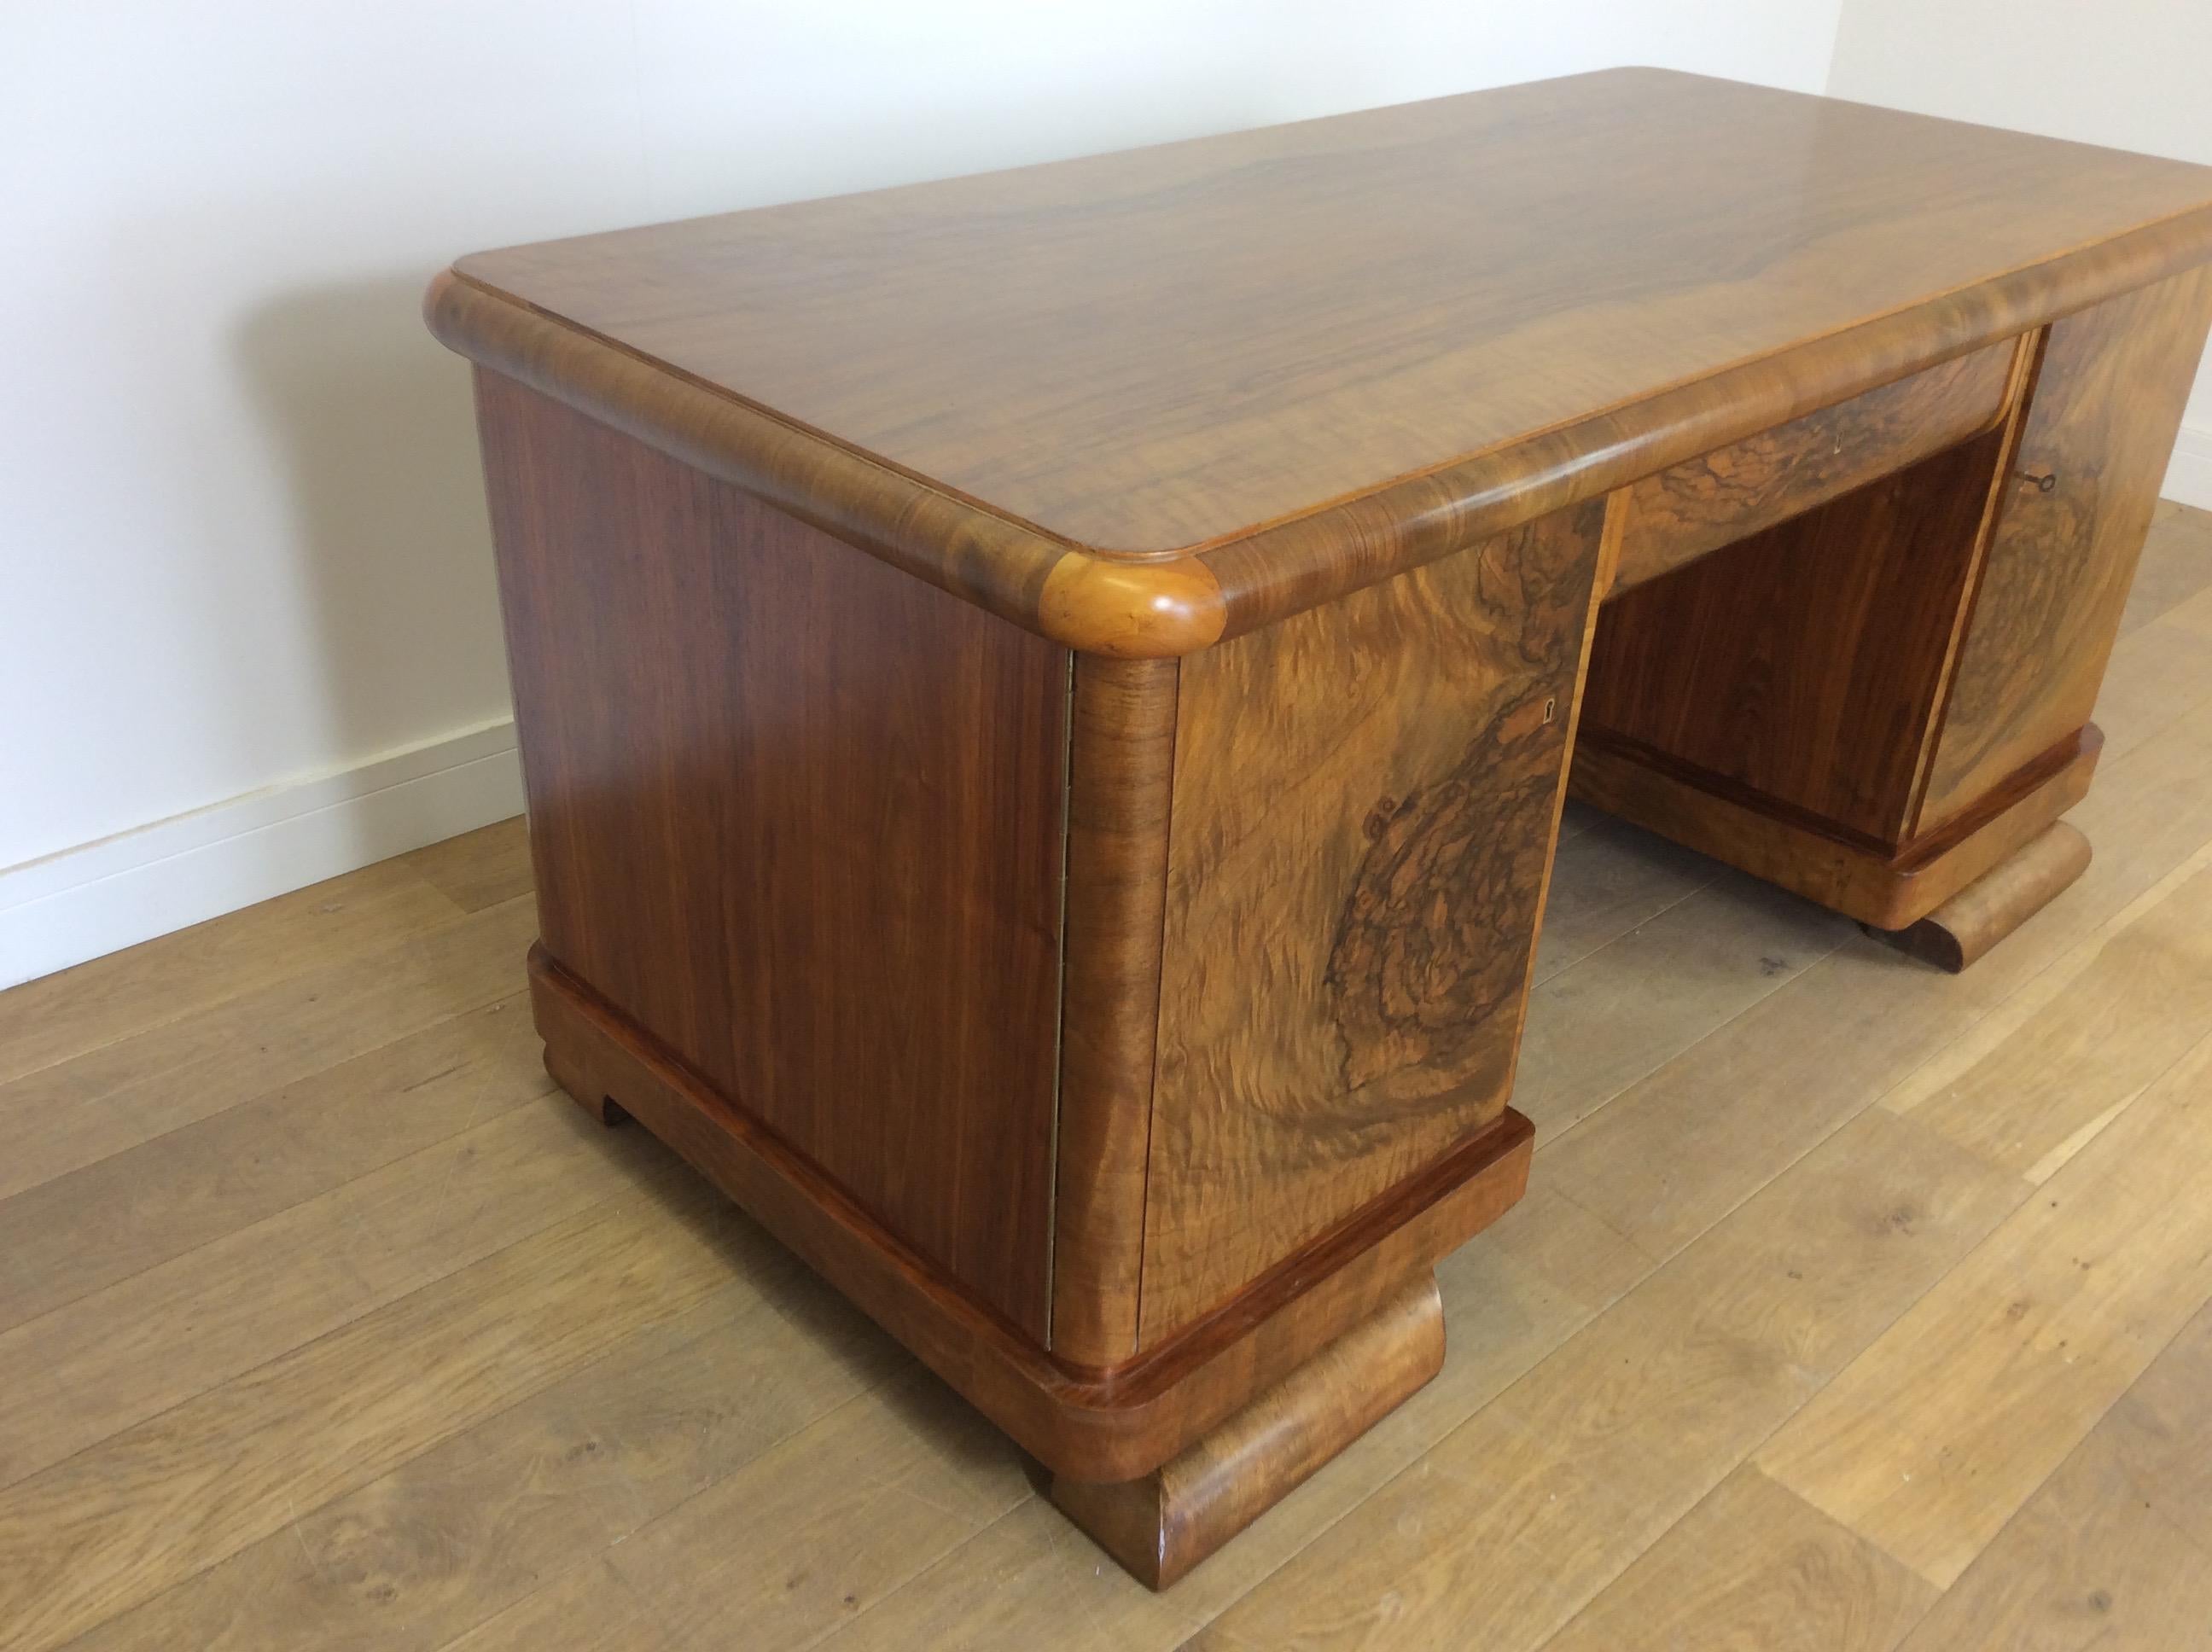 Large Art Deco desk by Jindrich Halabala in a stunning figured walnut.
Cupboard each side with single shelf, the top edge with beautiful curve, the central drawer also beautifully curves in underneath.
Czech, circa 1930.
Measures: 78.5 cm H, 163